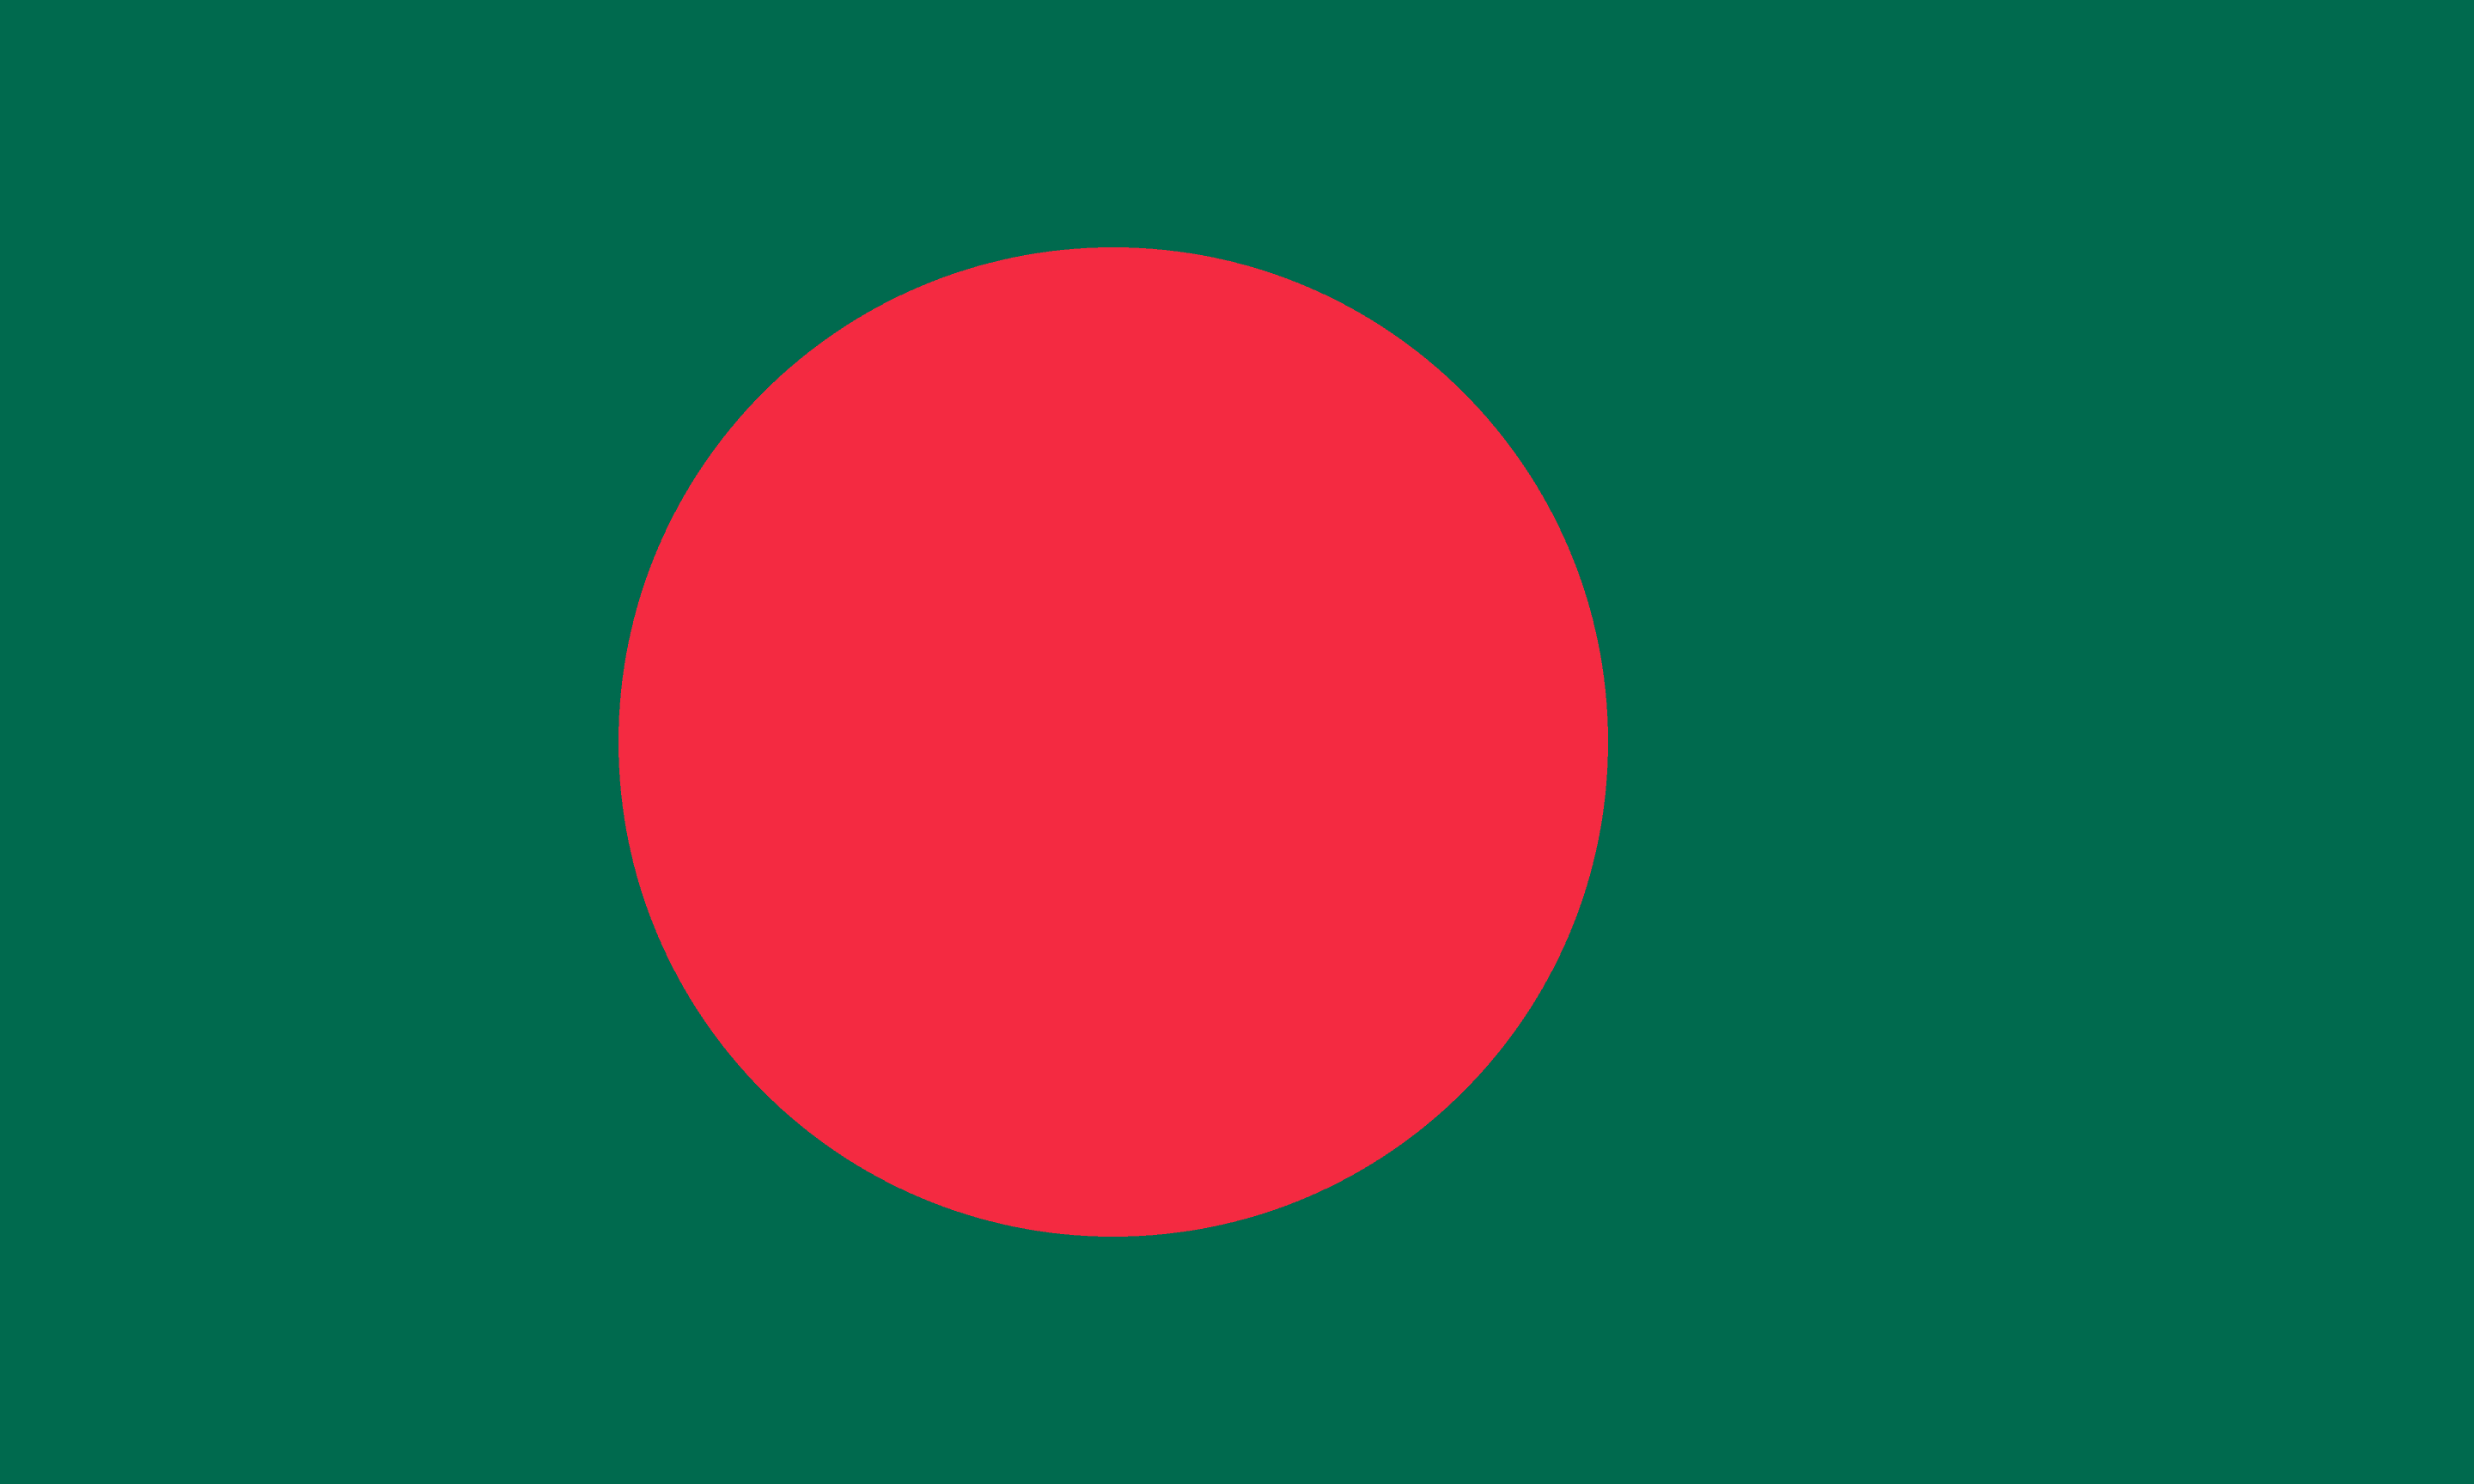 Drone Laws in Bangladesh